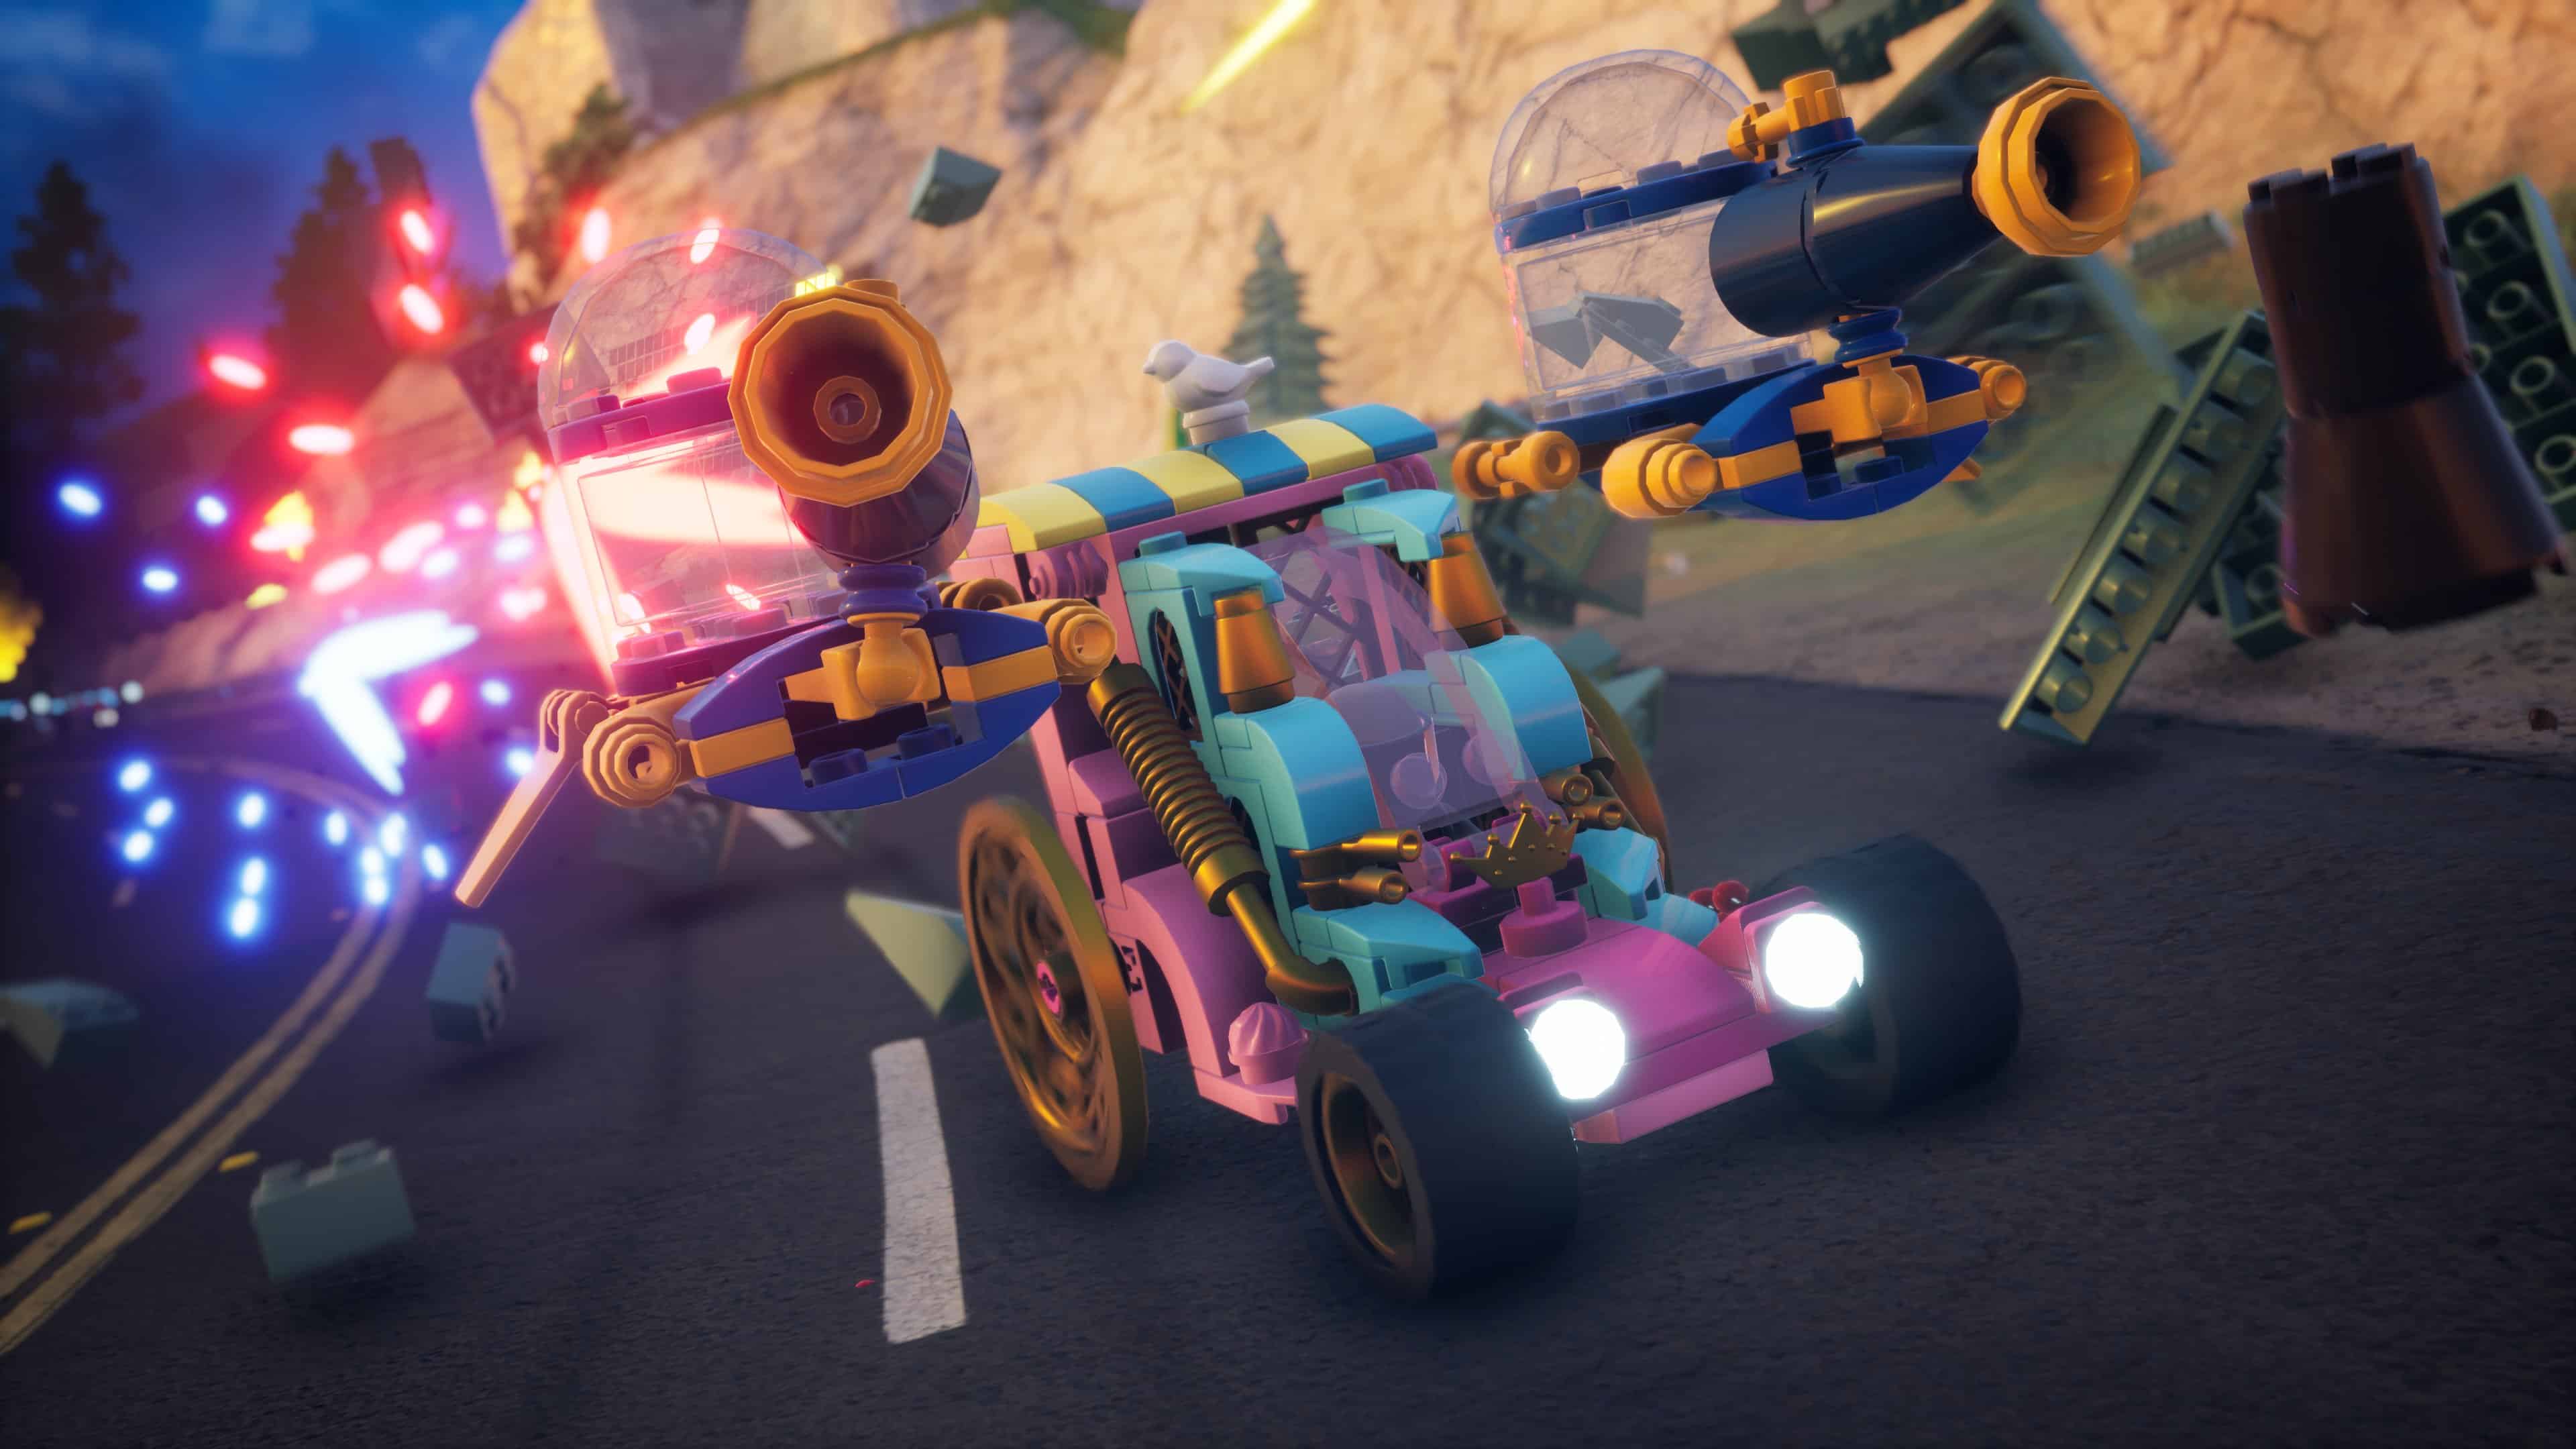 LEGO 2K Drive 1.13 Slides 3 for Dec. 13 Out Season This